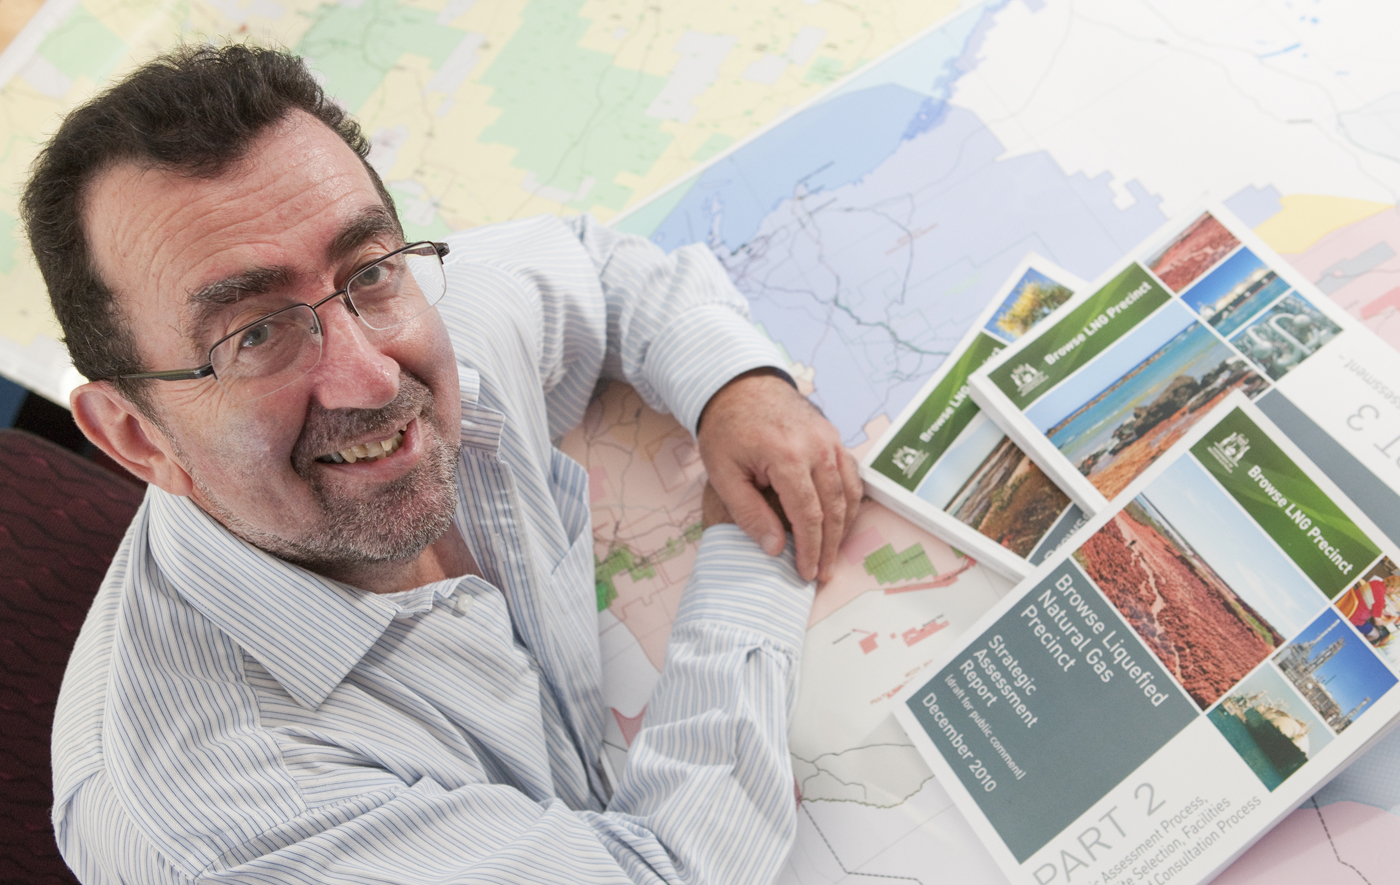 Professor Ciaran O'Faircheallaigh, Griffith University, looks up from brochures and maps.